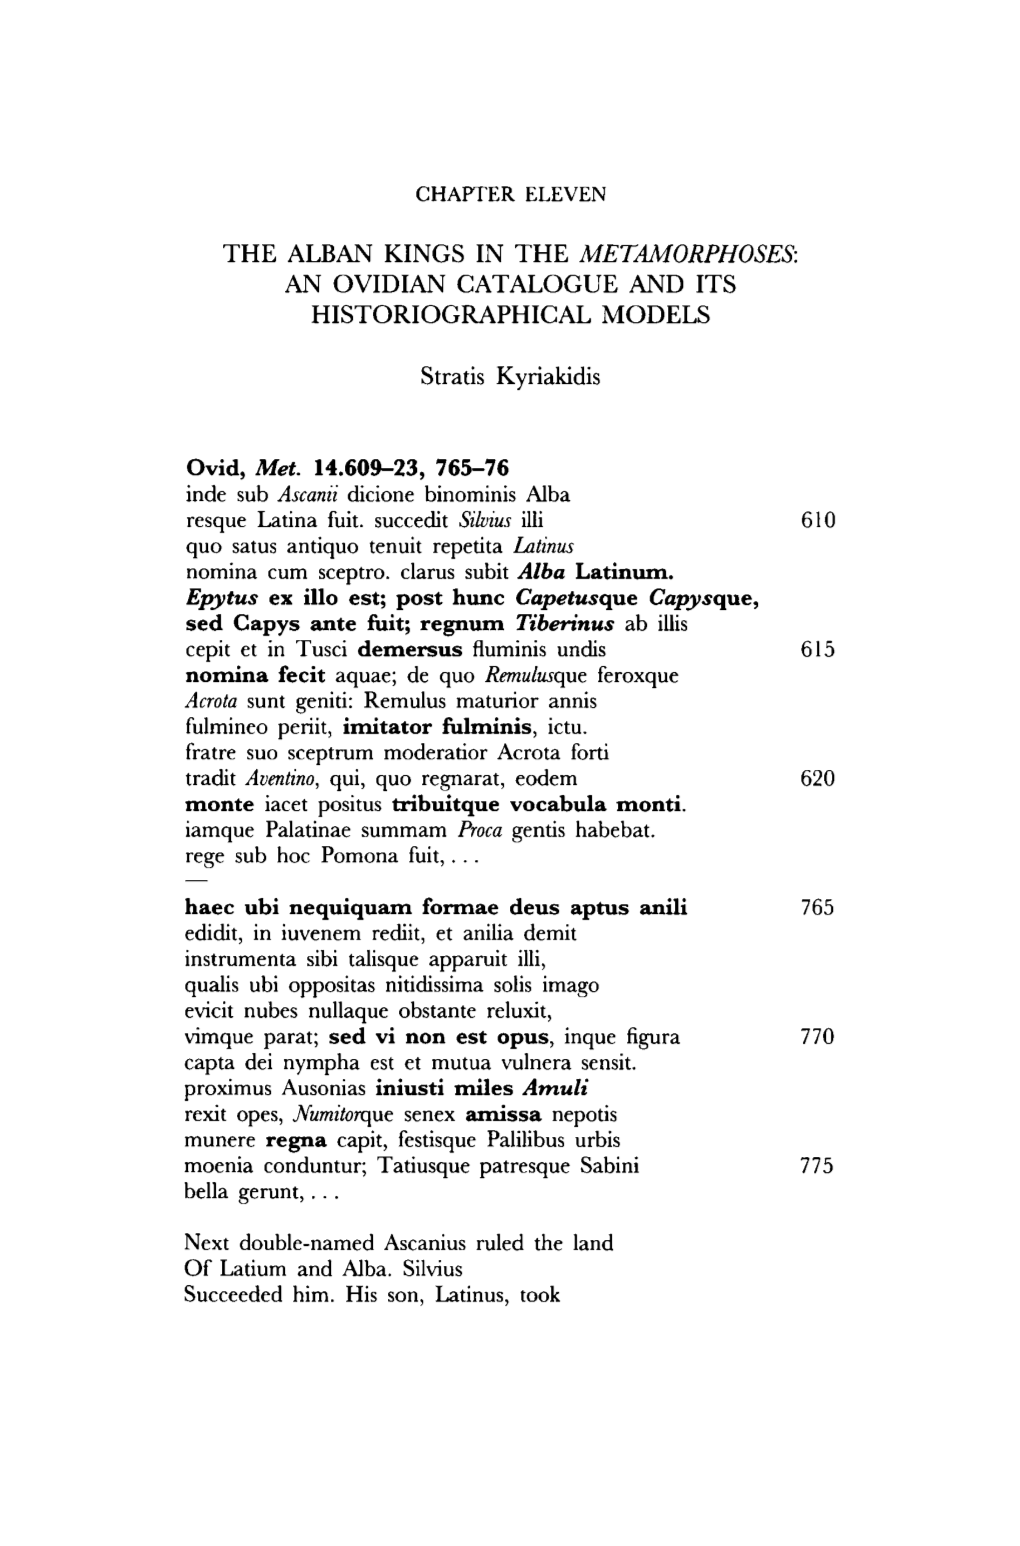 The Alban Kings in the Metamorphoses: an Ovidian Catalogue and Its Historiographical Models